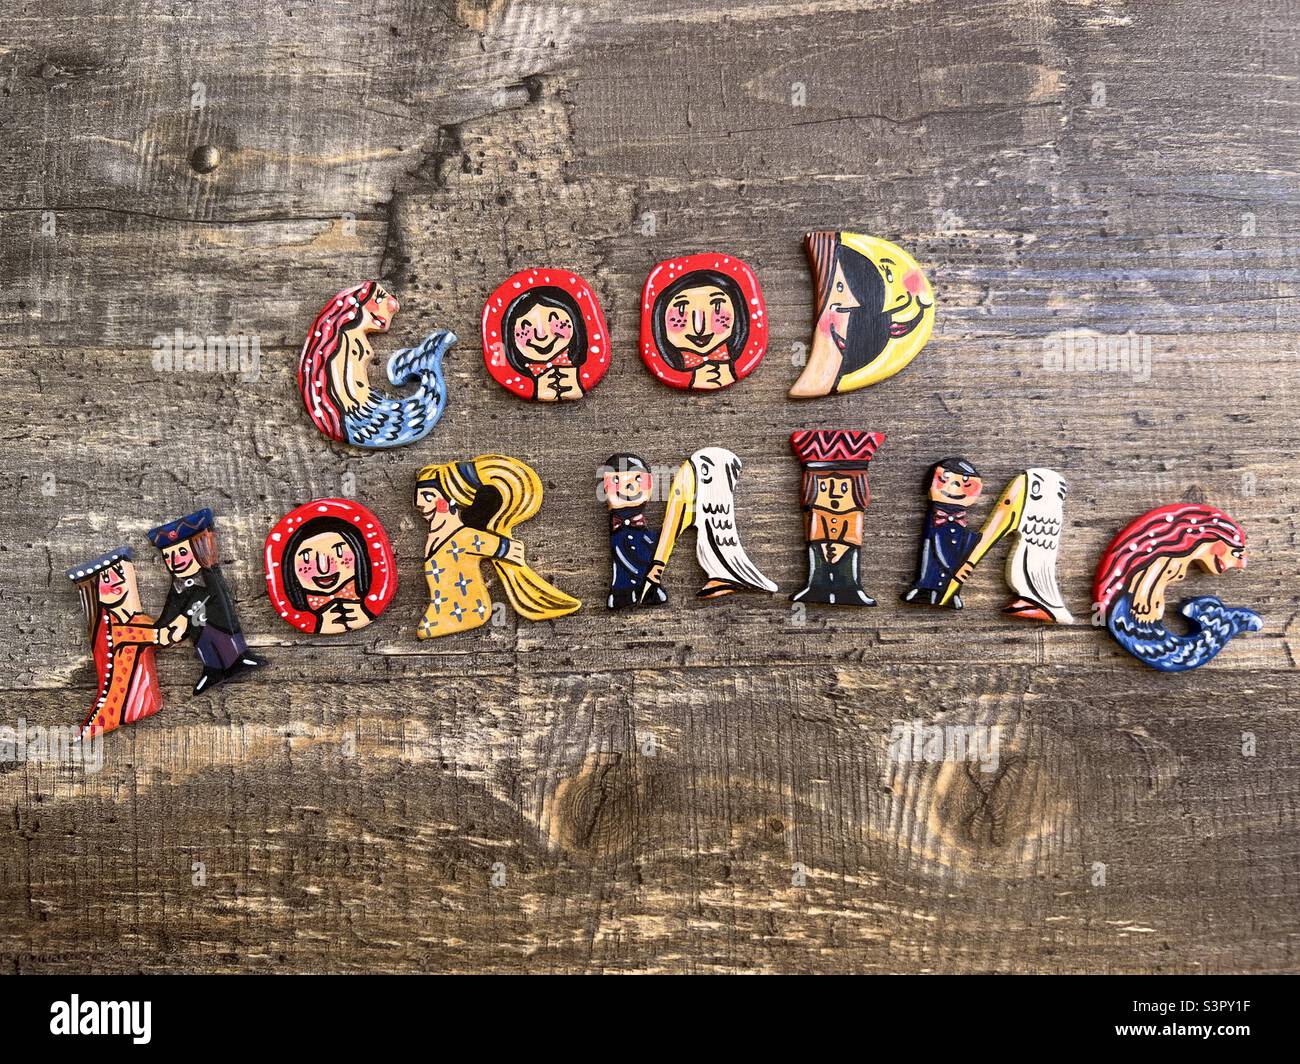 Good morning text composed with funny and creative hand made wooden letters over a wooden board Stock Photo